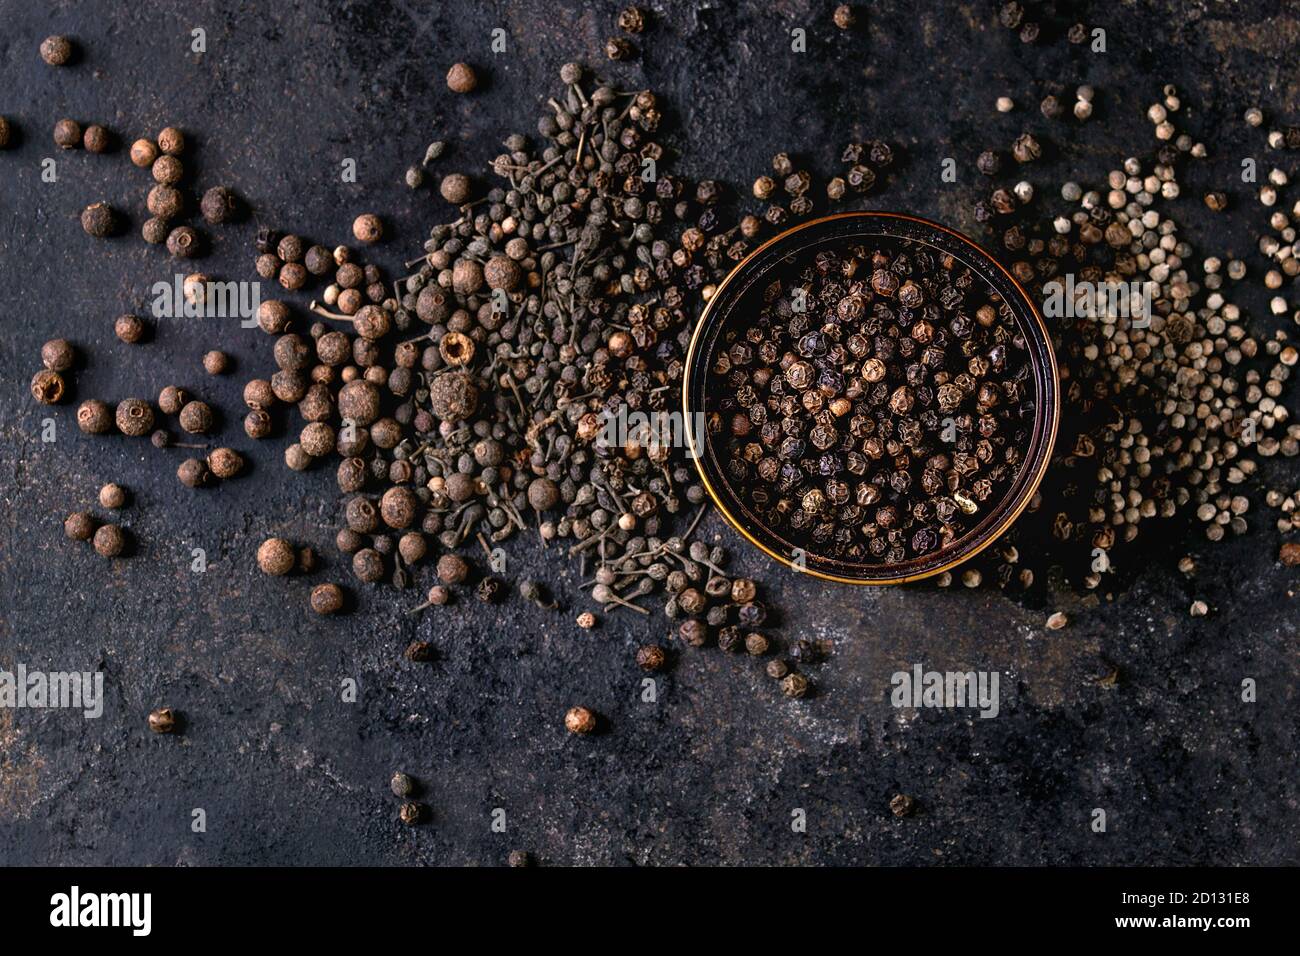 Variety of different black peppers allspice, pimento, monks pepper, peppercorns and ground powder in tin can over old black iron texture background. T Stock Photo